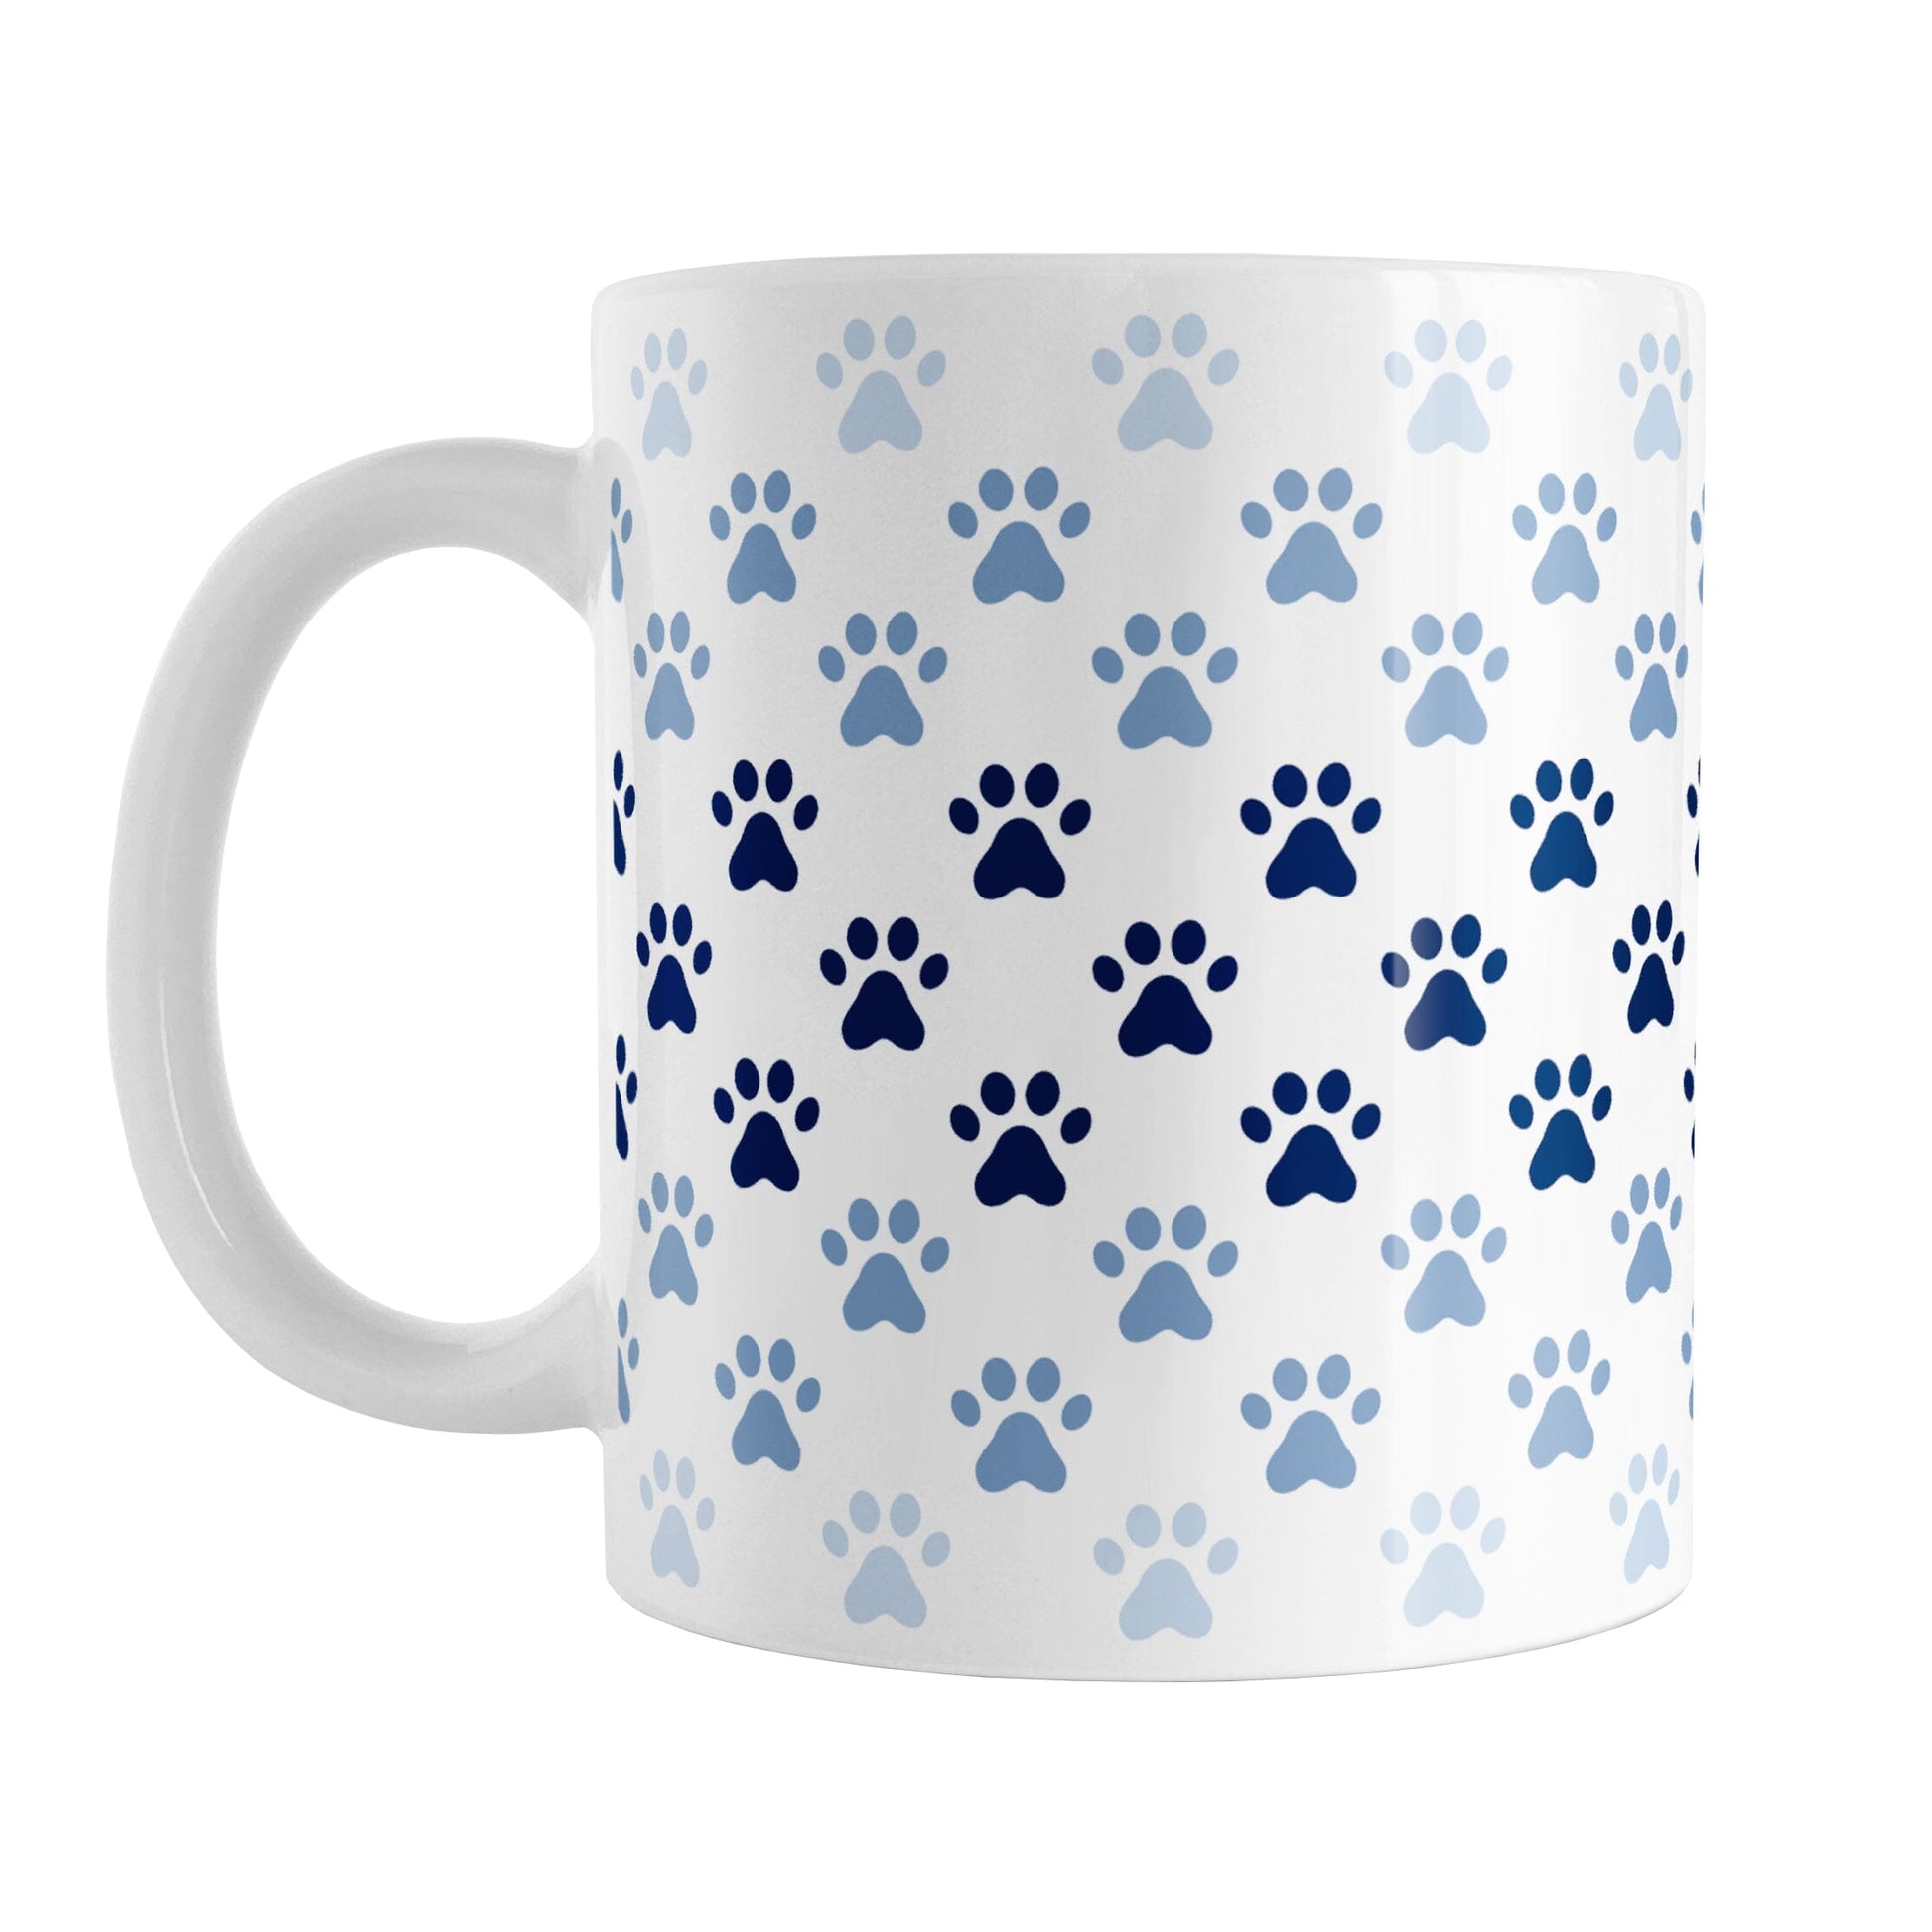 Paw Prints in Blue Mug (11oz) at Amy's Coffee Mugs. A ceramic coffee mug designed with paw prints in different shades of blue, with the darker blue color across the middle and the lighter blue along the top and bottom, in a pattern that wraps around the mug to the handle.